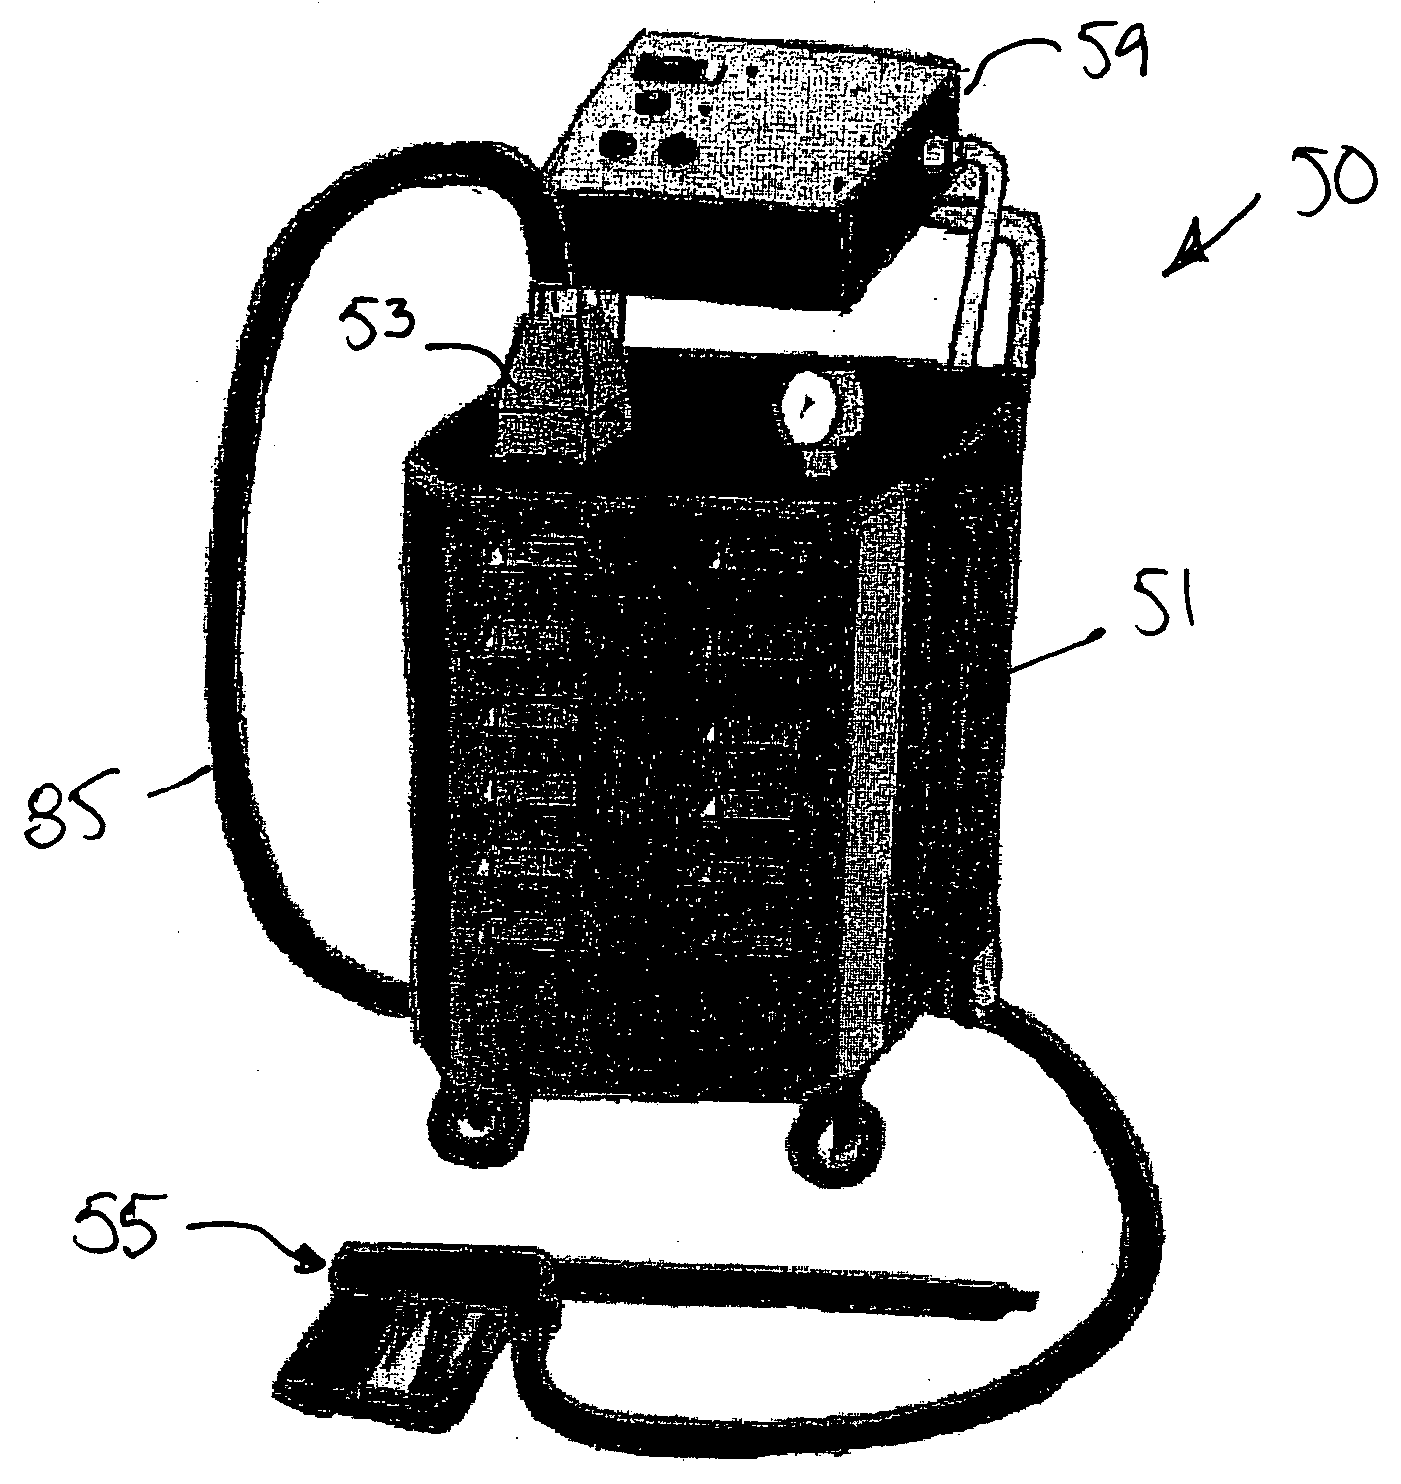 Low pressure saturated steam cleaning assembly with chemical delivery system